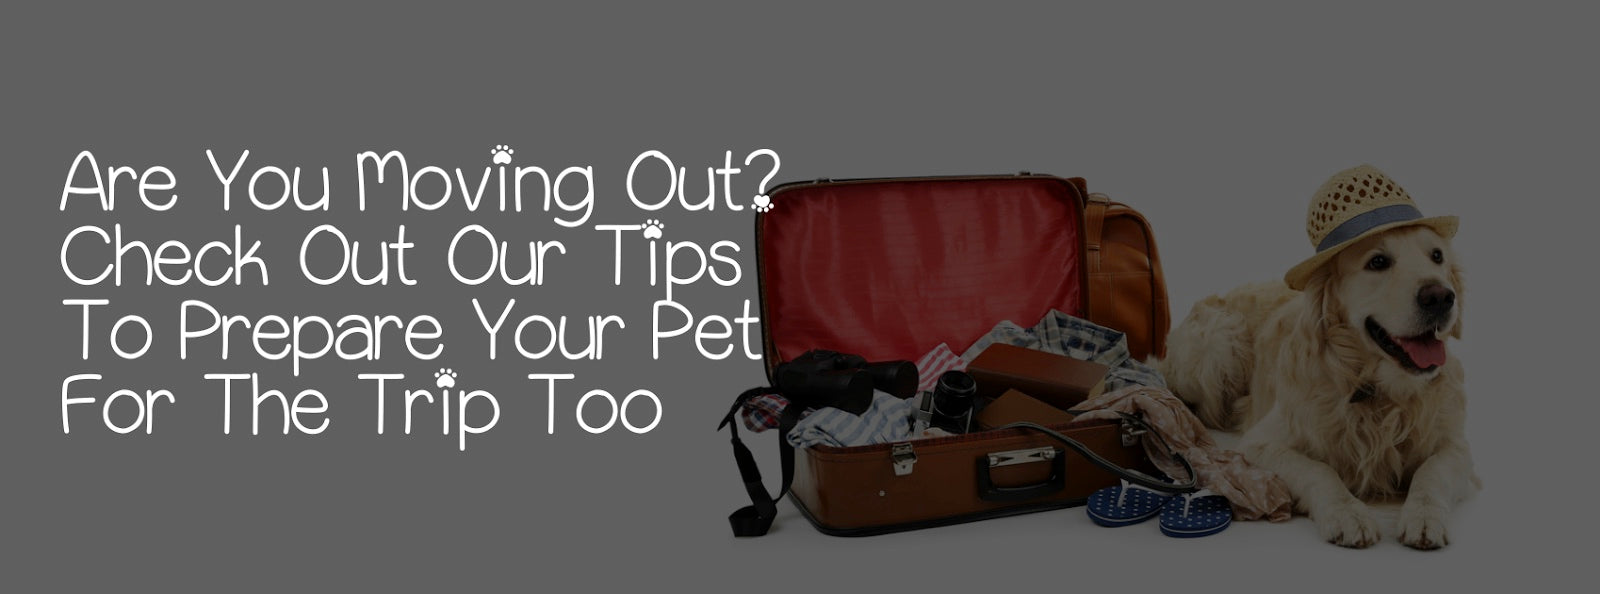 ARE YOU MOVING OUT? CHECK  OUT OUR TIPS TO PREPARE  YOUR PET FOR THE TRIP TOO